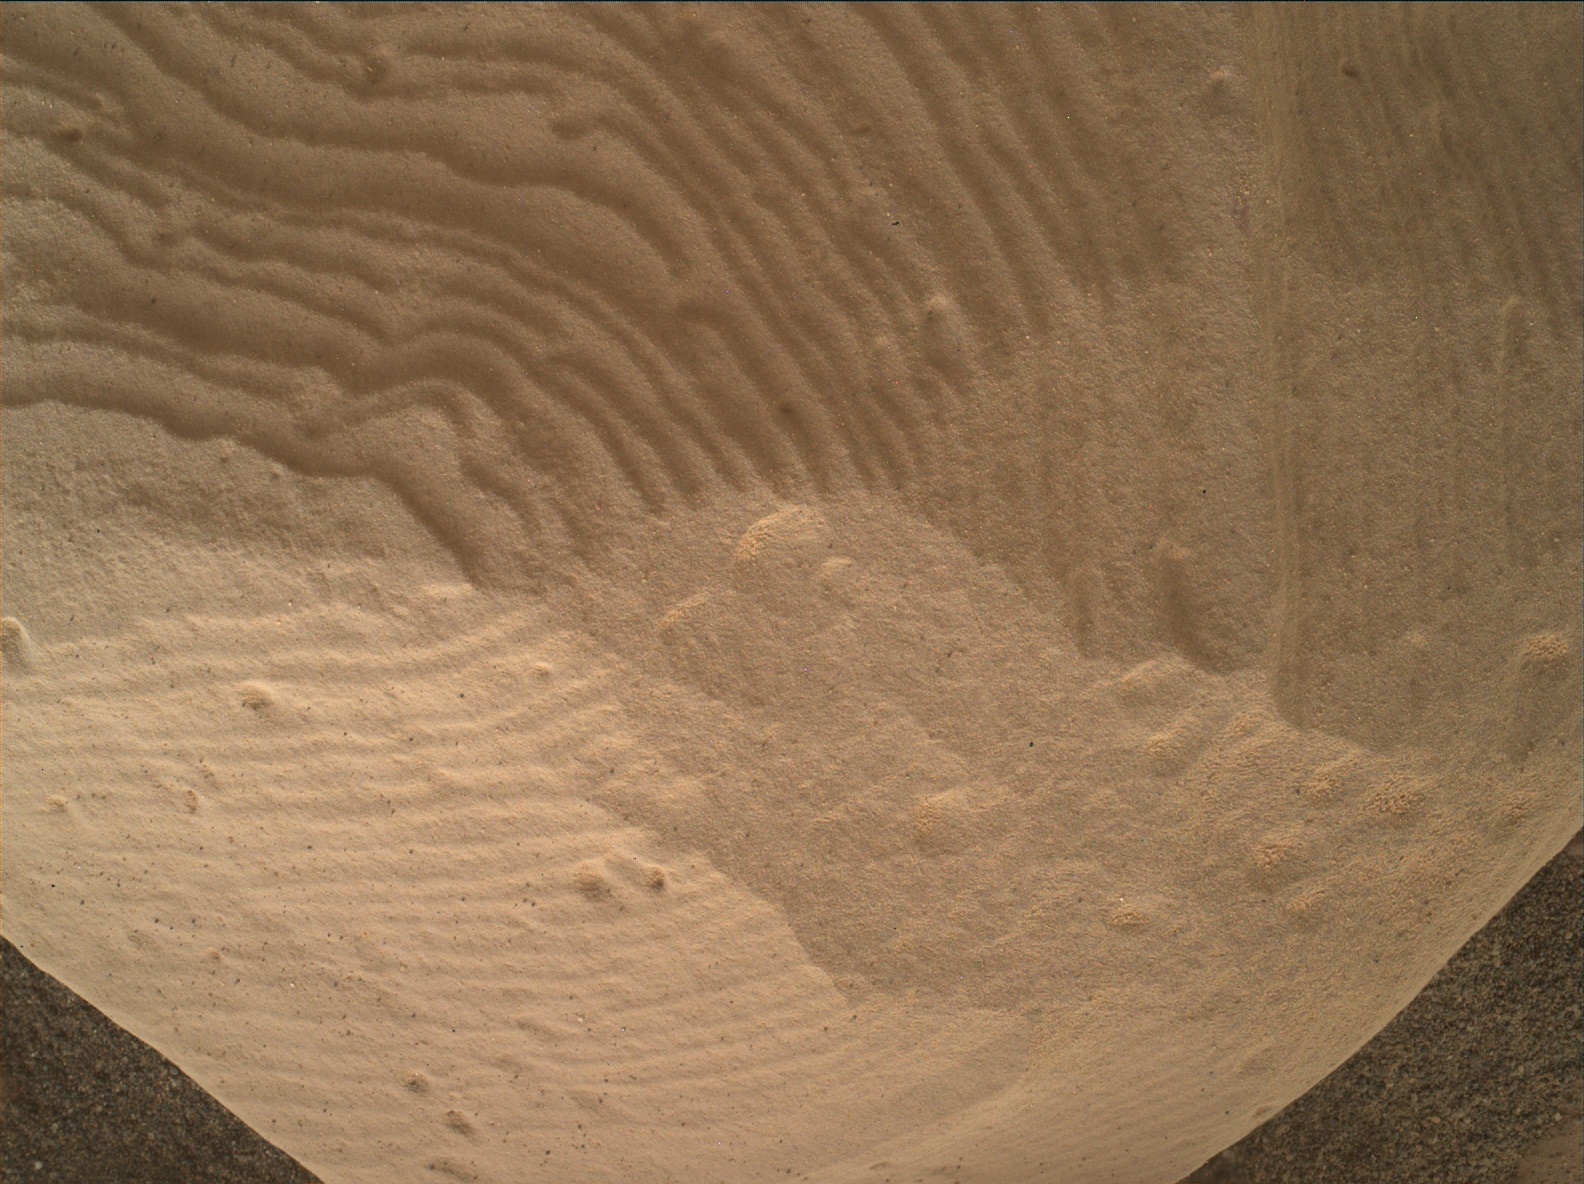 Nasa's Mars rover Curiosity acquired this image using its Mars Hand Lens Imager (MAHLI) on Sol 1819